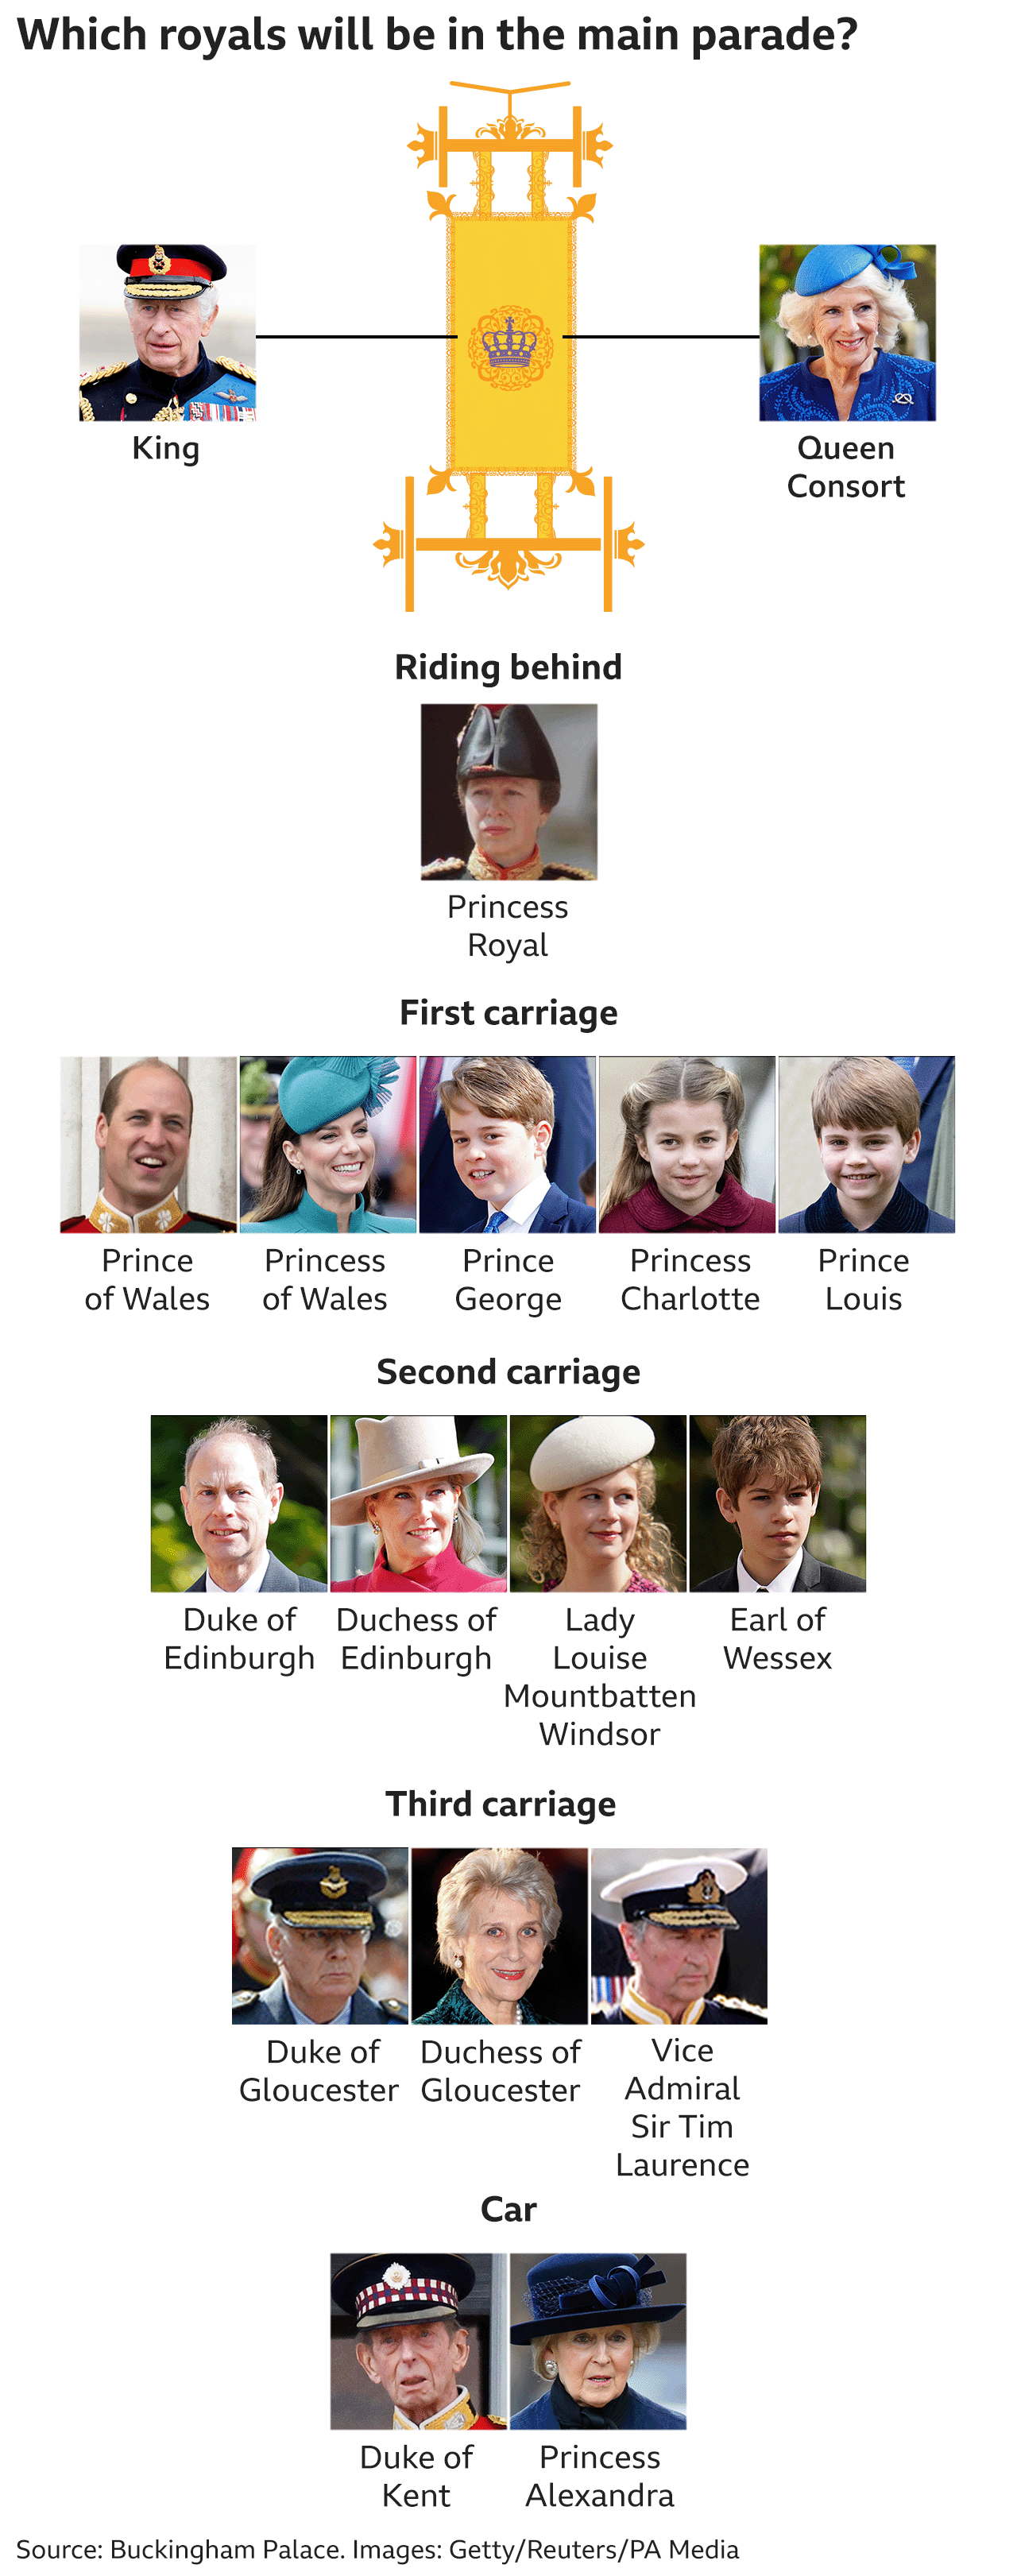 Graphic showing which royals are taking part in the main procession, with the King and Queen Consort in the Gold State Coach, the Princess Royal riding behind them, the Prince and Princess of Wales and their three children in the first carriage, the Duke and Duchess of Edinburgh and their two children in the second carriage, the Duke and Duchess of Gloucester with Vice Admiral Sir Tim Laurence in the third carriage and the Duke of Kent and Princess Alexandra in a car behind them